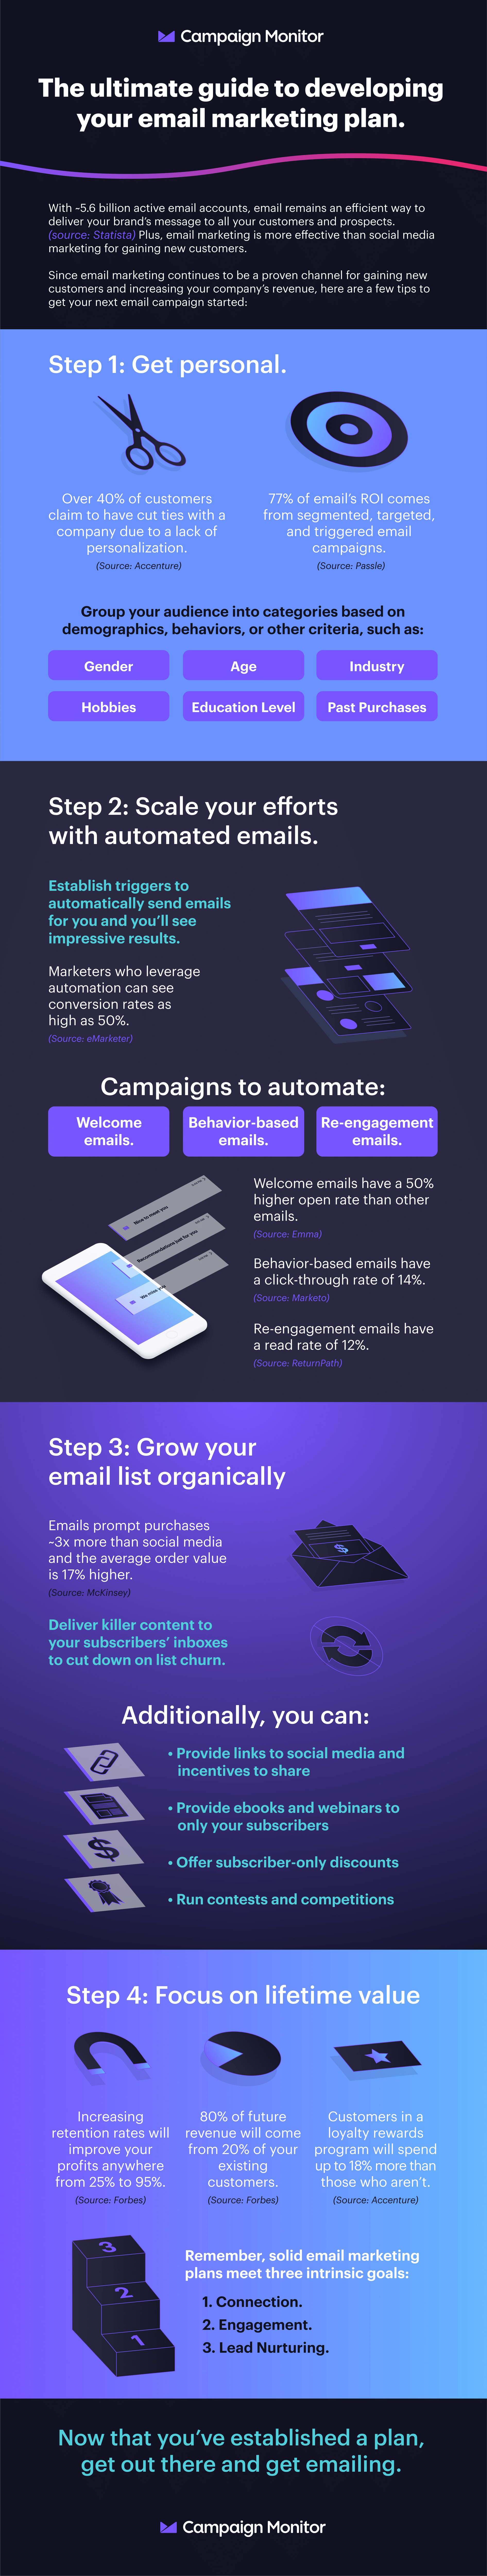 ultimate guide for your email marketing plan